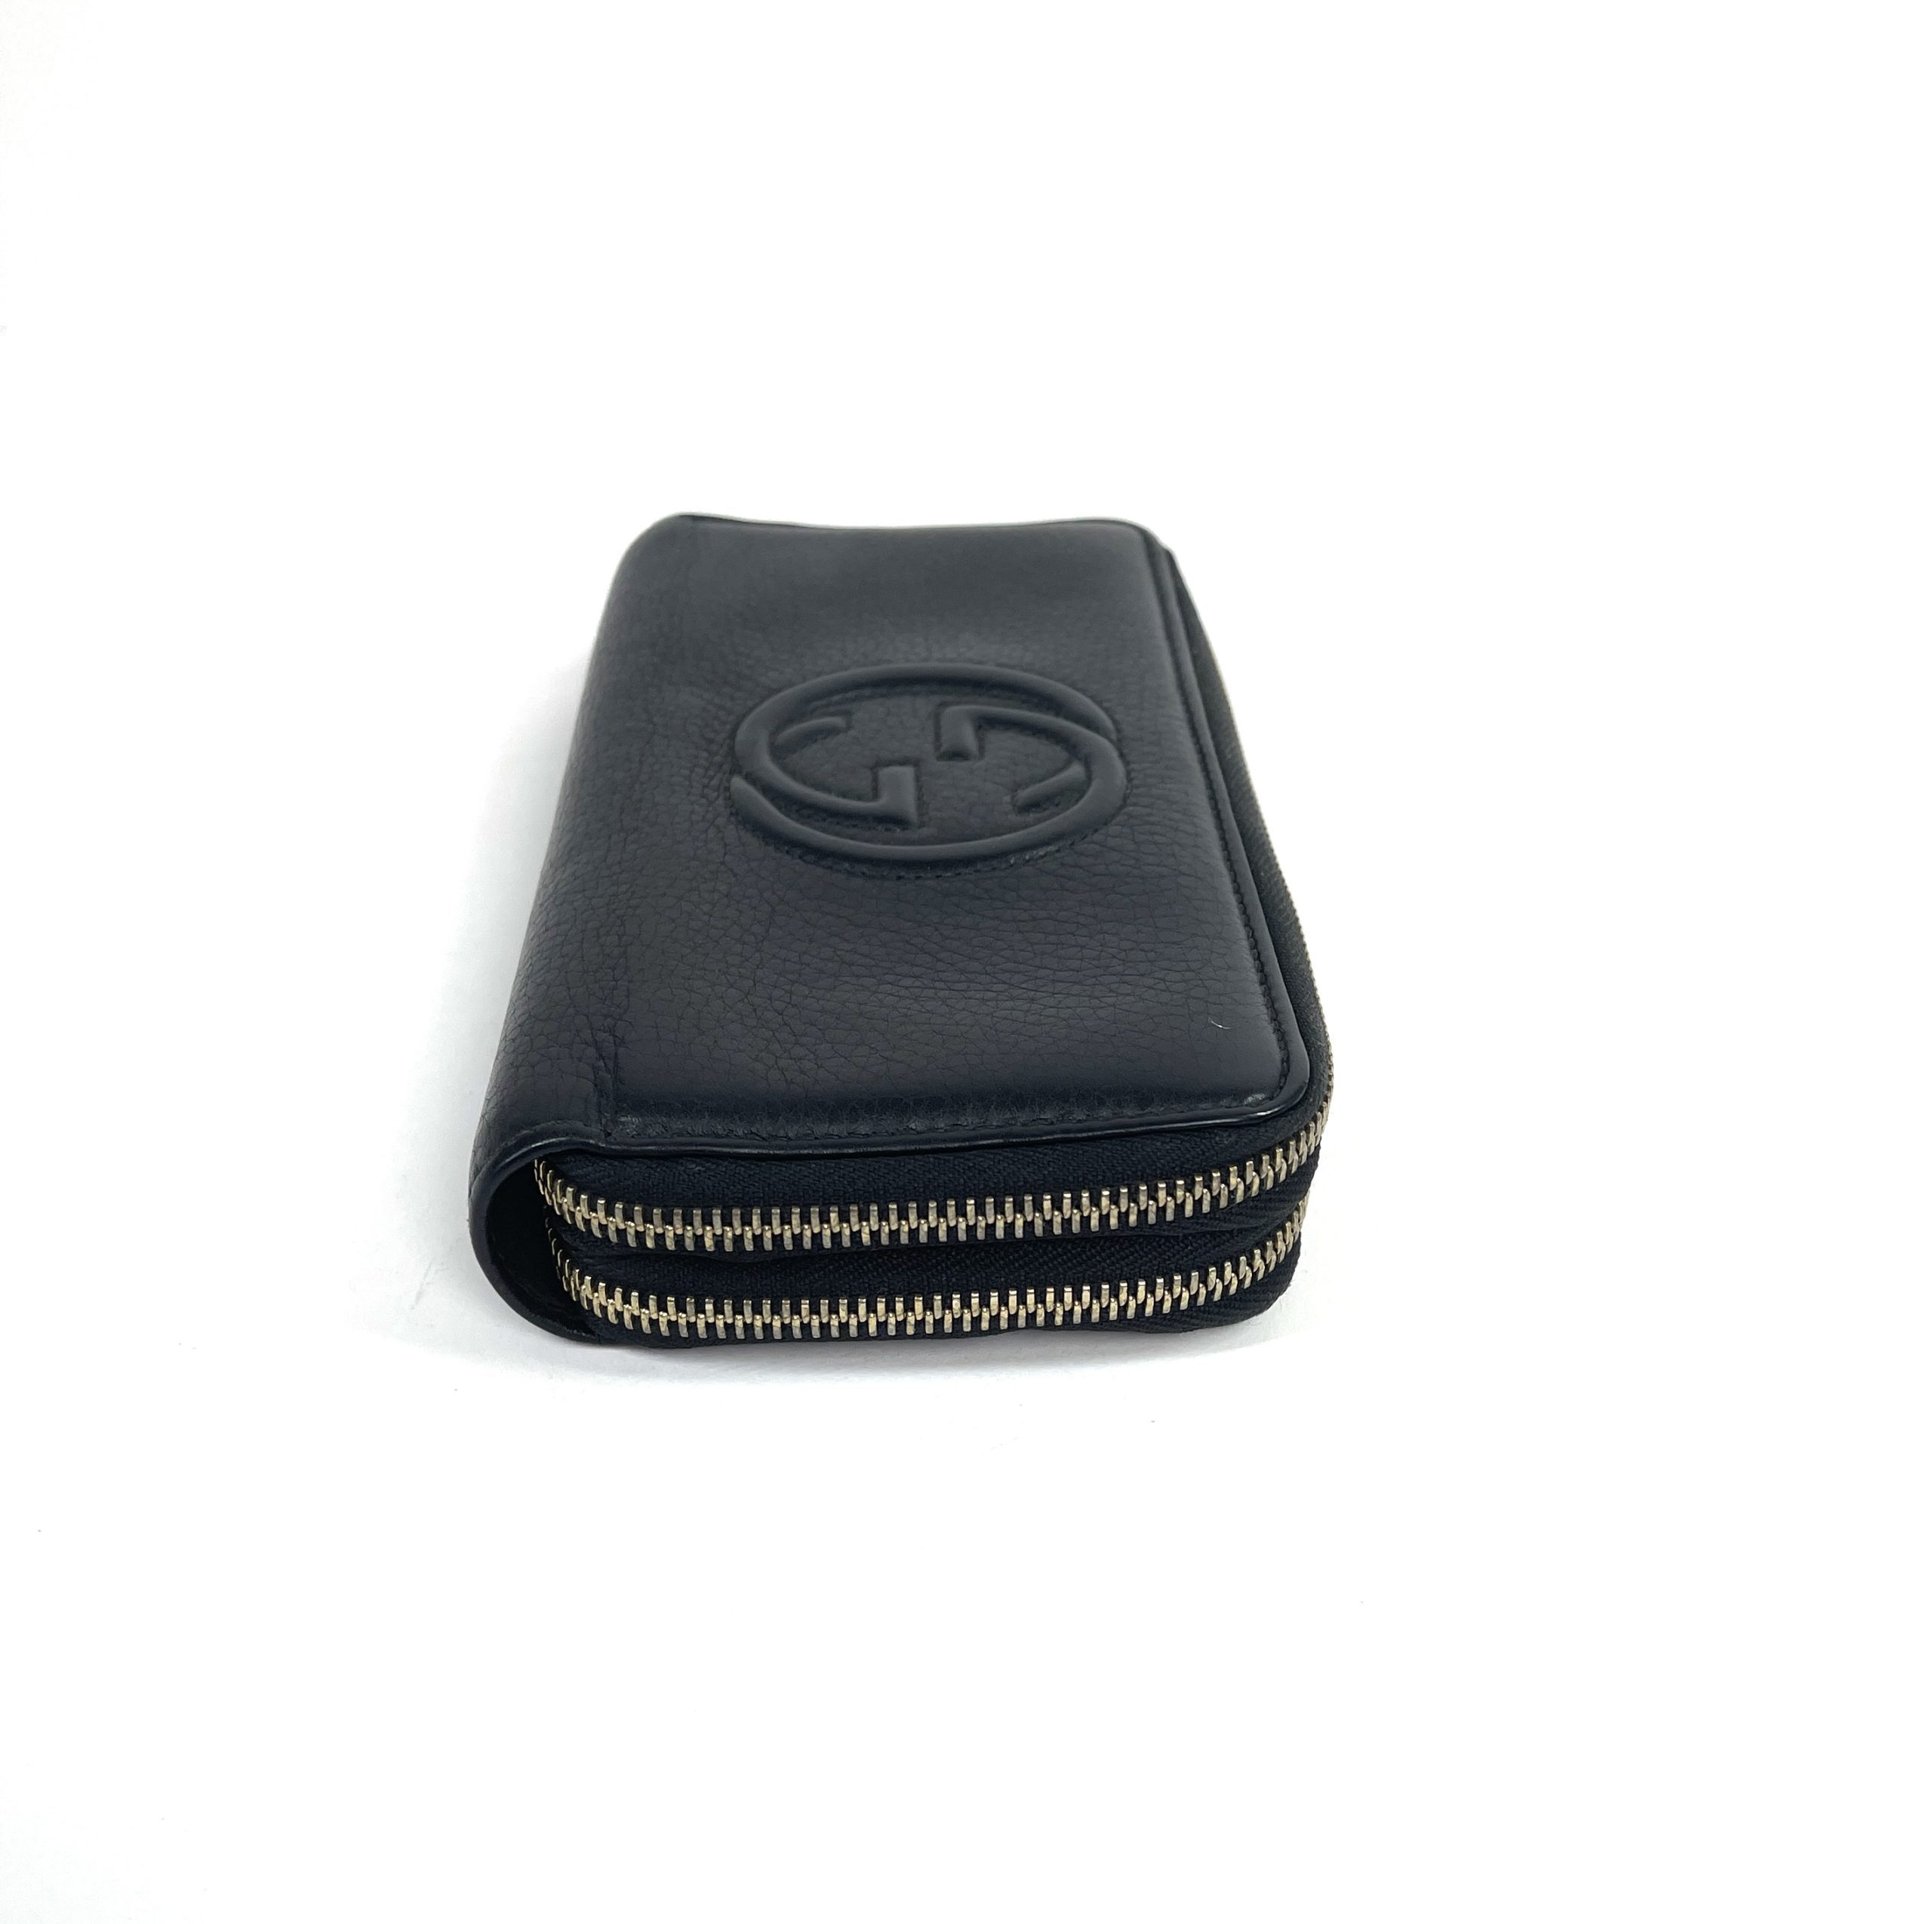 Gucci Microguccissima Small Zip Wallet with Key Ring in Black